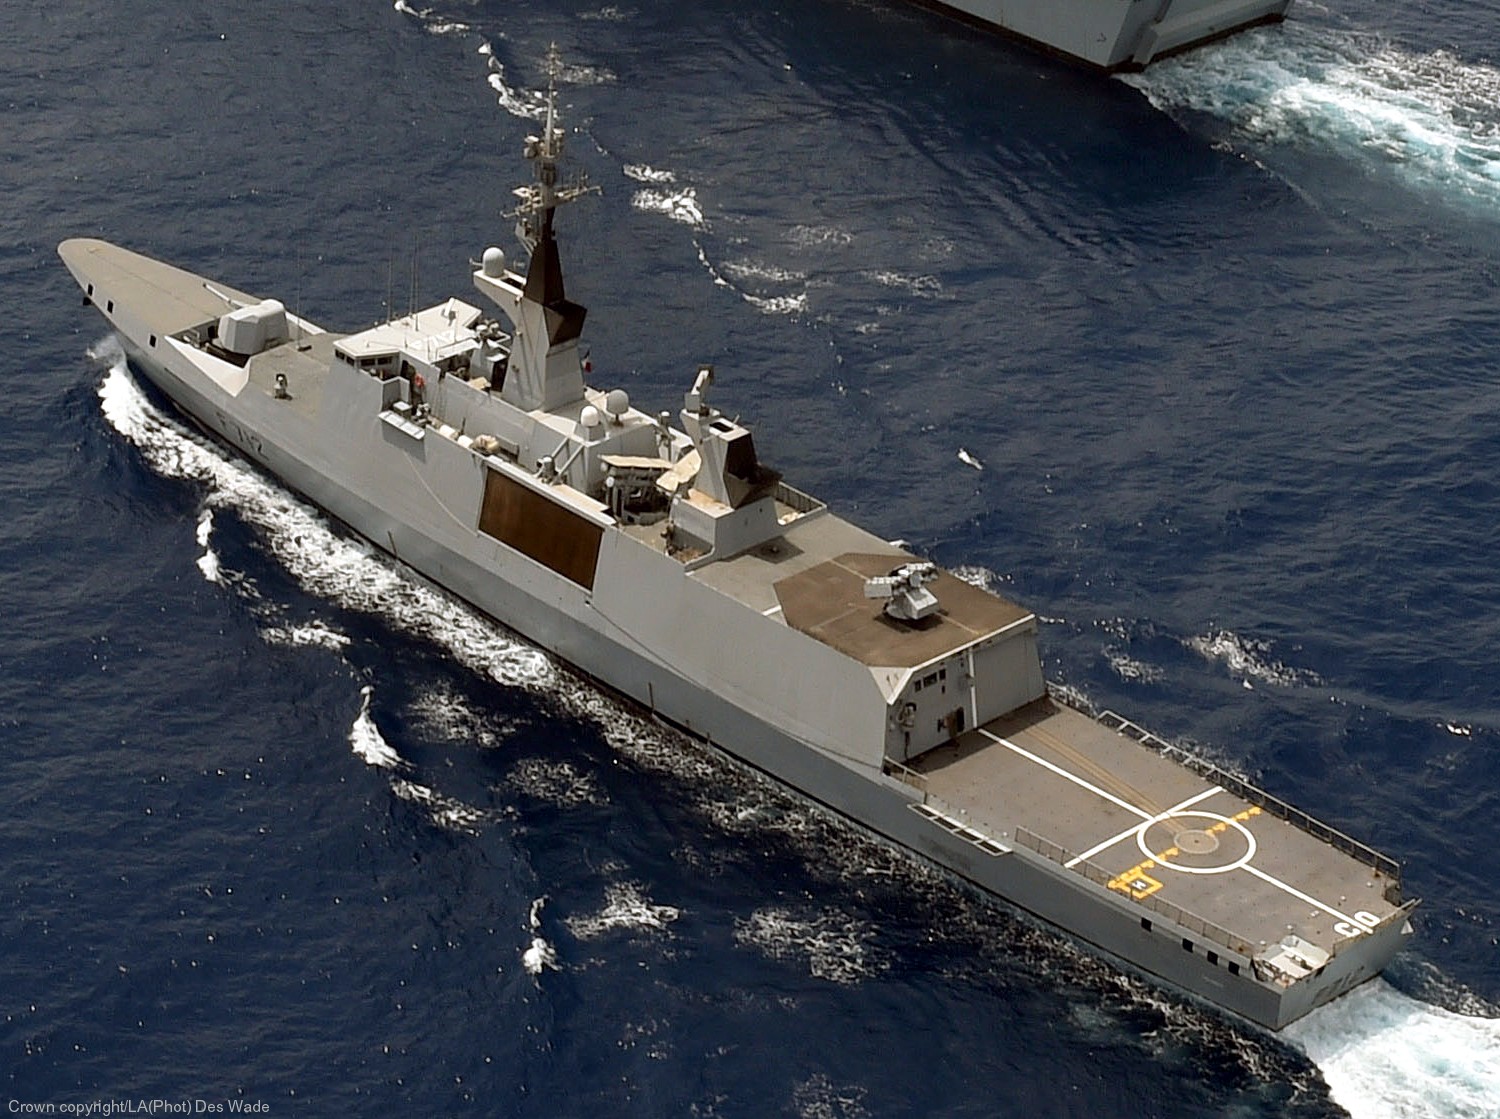 f-712 fs courbet la fayette class frigate french navy marine nationale stealth 12